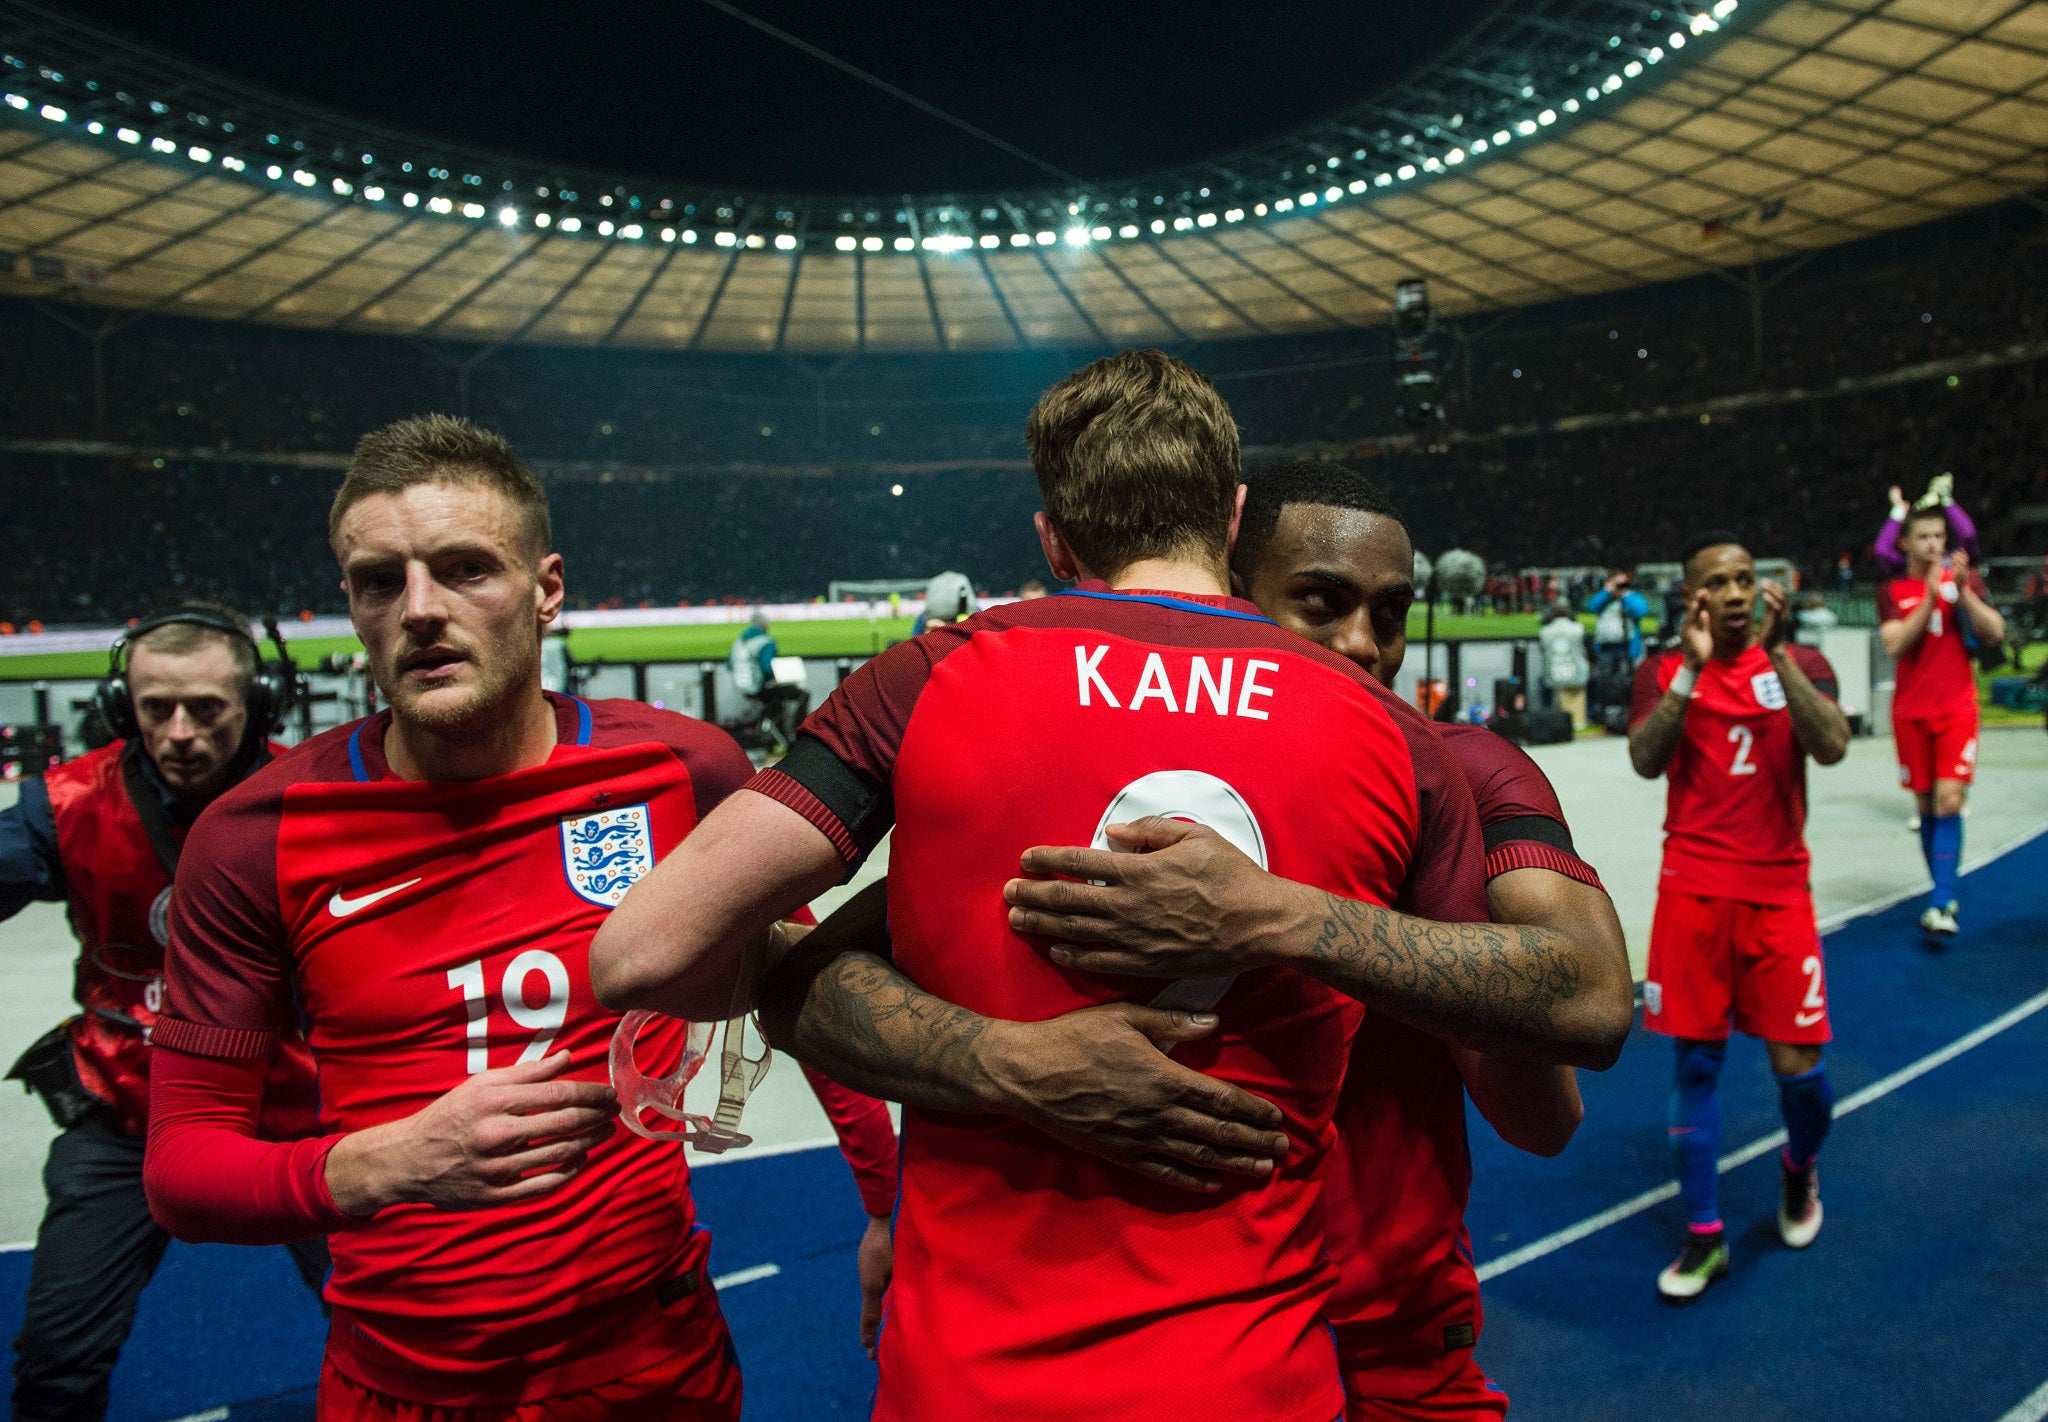 Jamie Vardy, Harry Kane and Danny Rose celebrate after England's 3-2 win over Germany